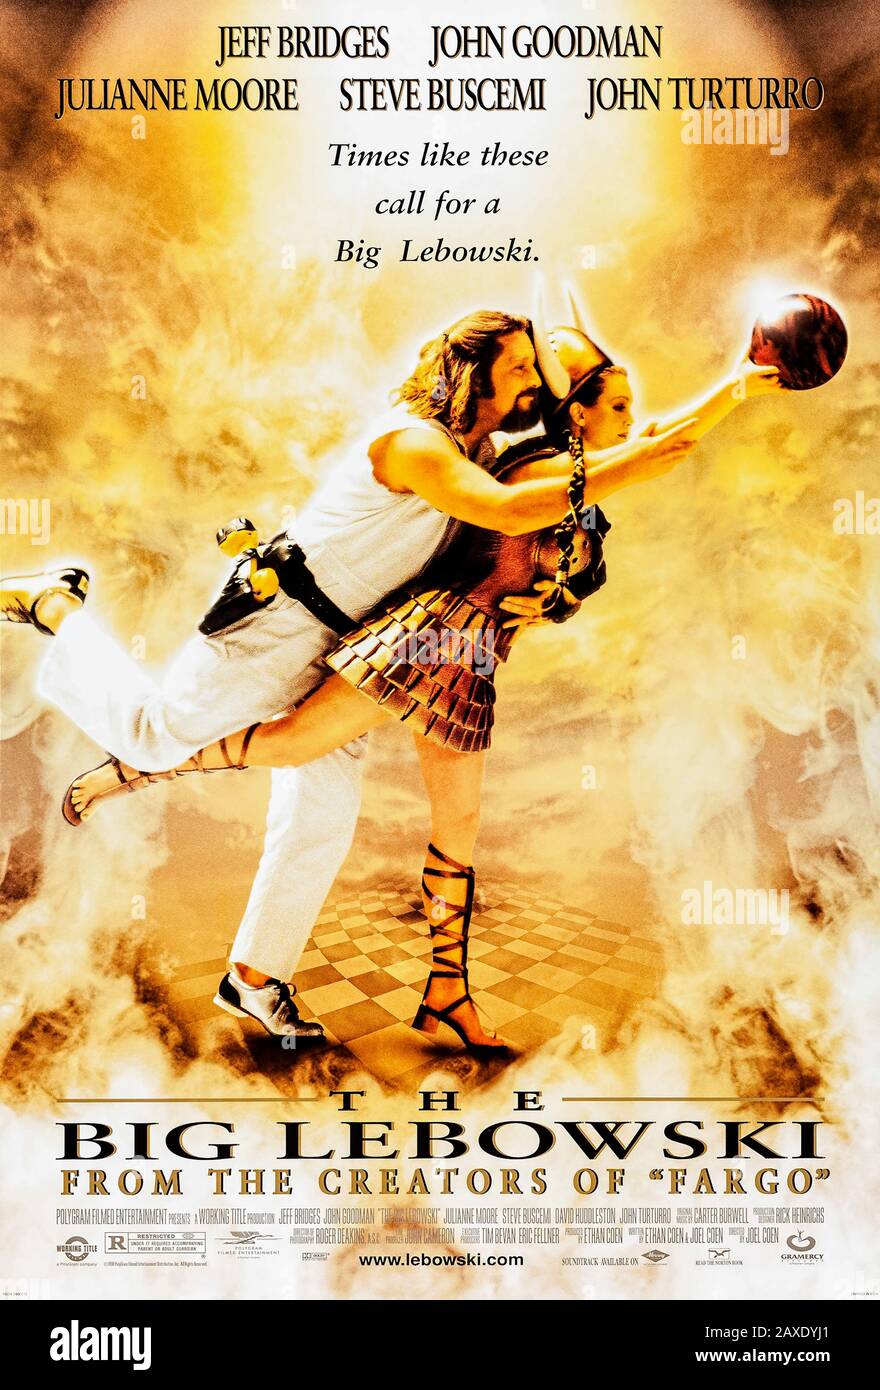 The Big Lebowski (1998) directed by Joel and Ethan Coen and starring Jeff Bridges, John Goodman, Julianne Moore and John Turturro. Cult classic about 'The Dude' and his journey for compensation for his ruined rug. Stock Photo